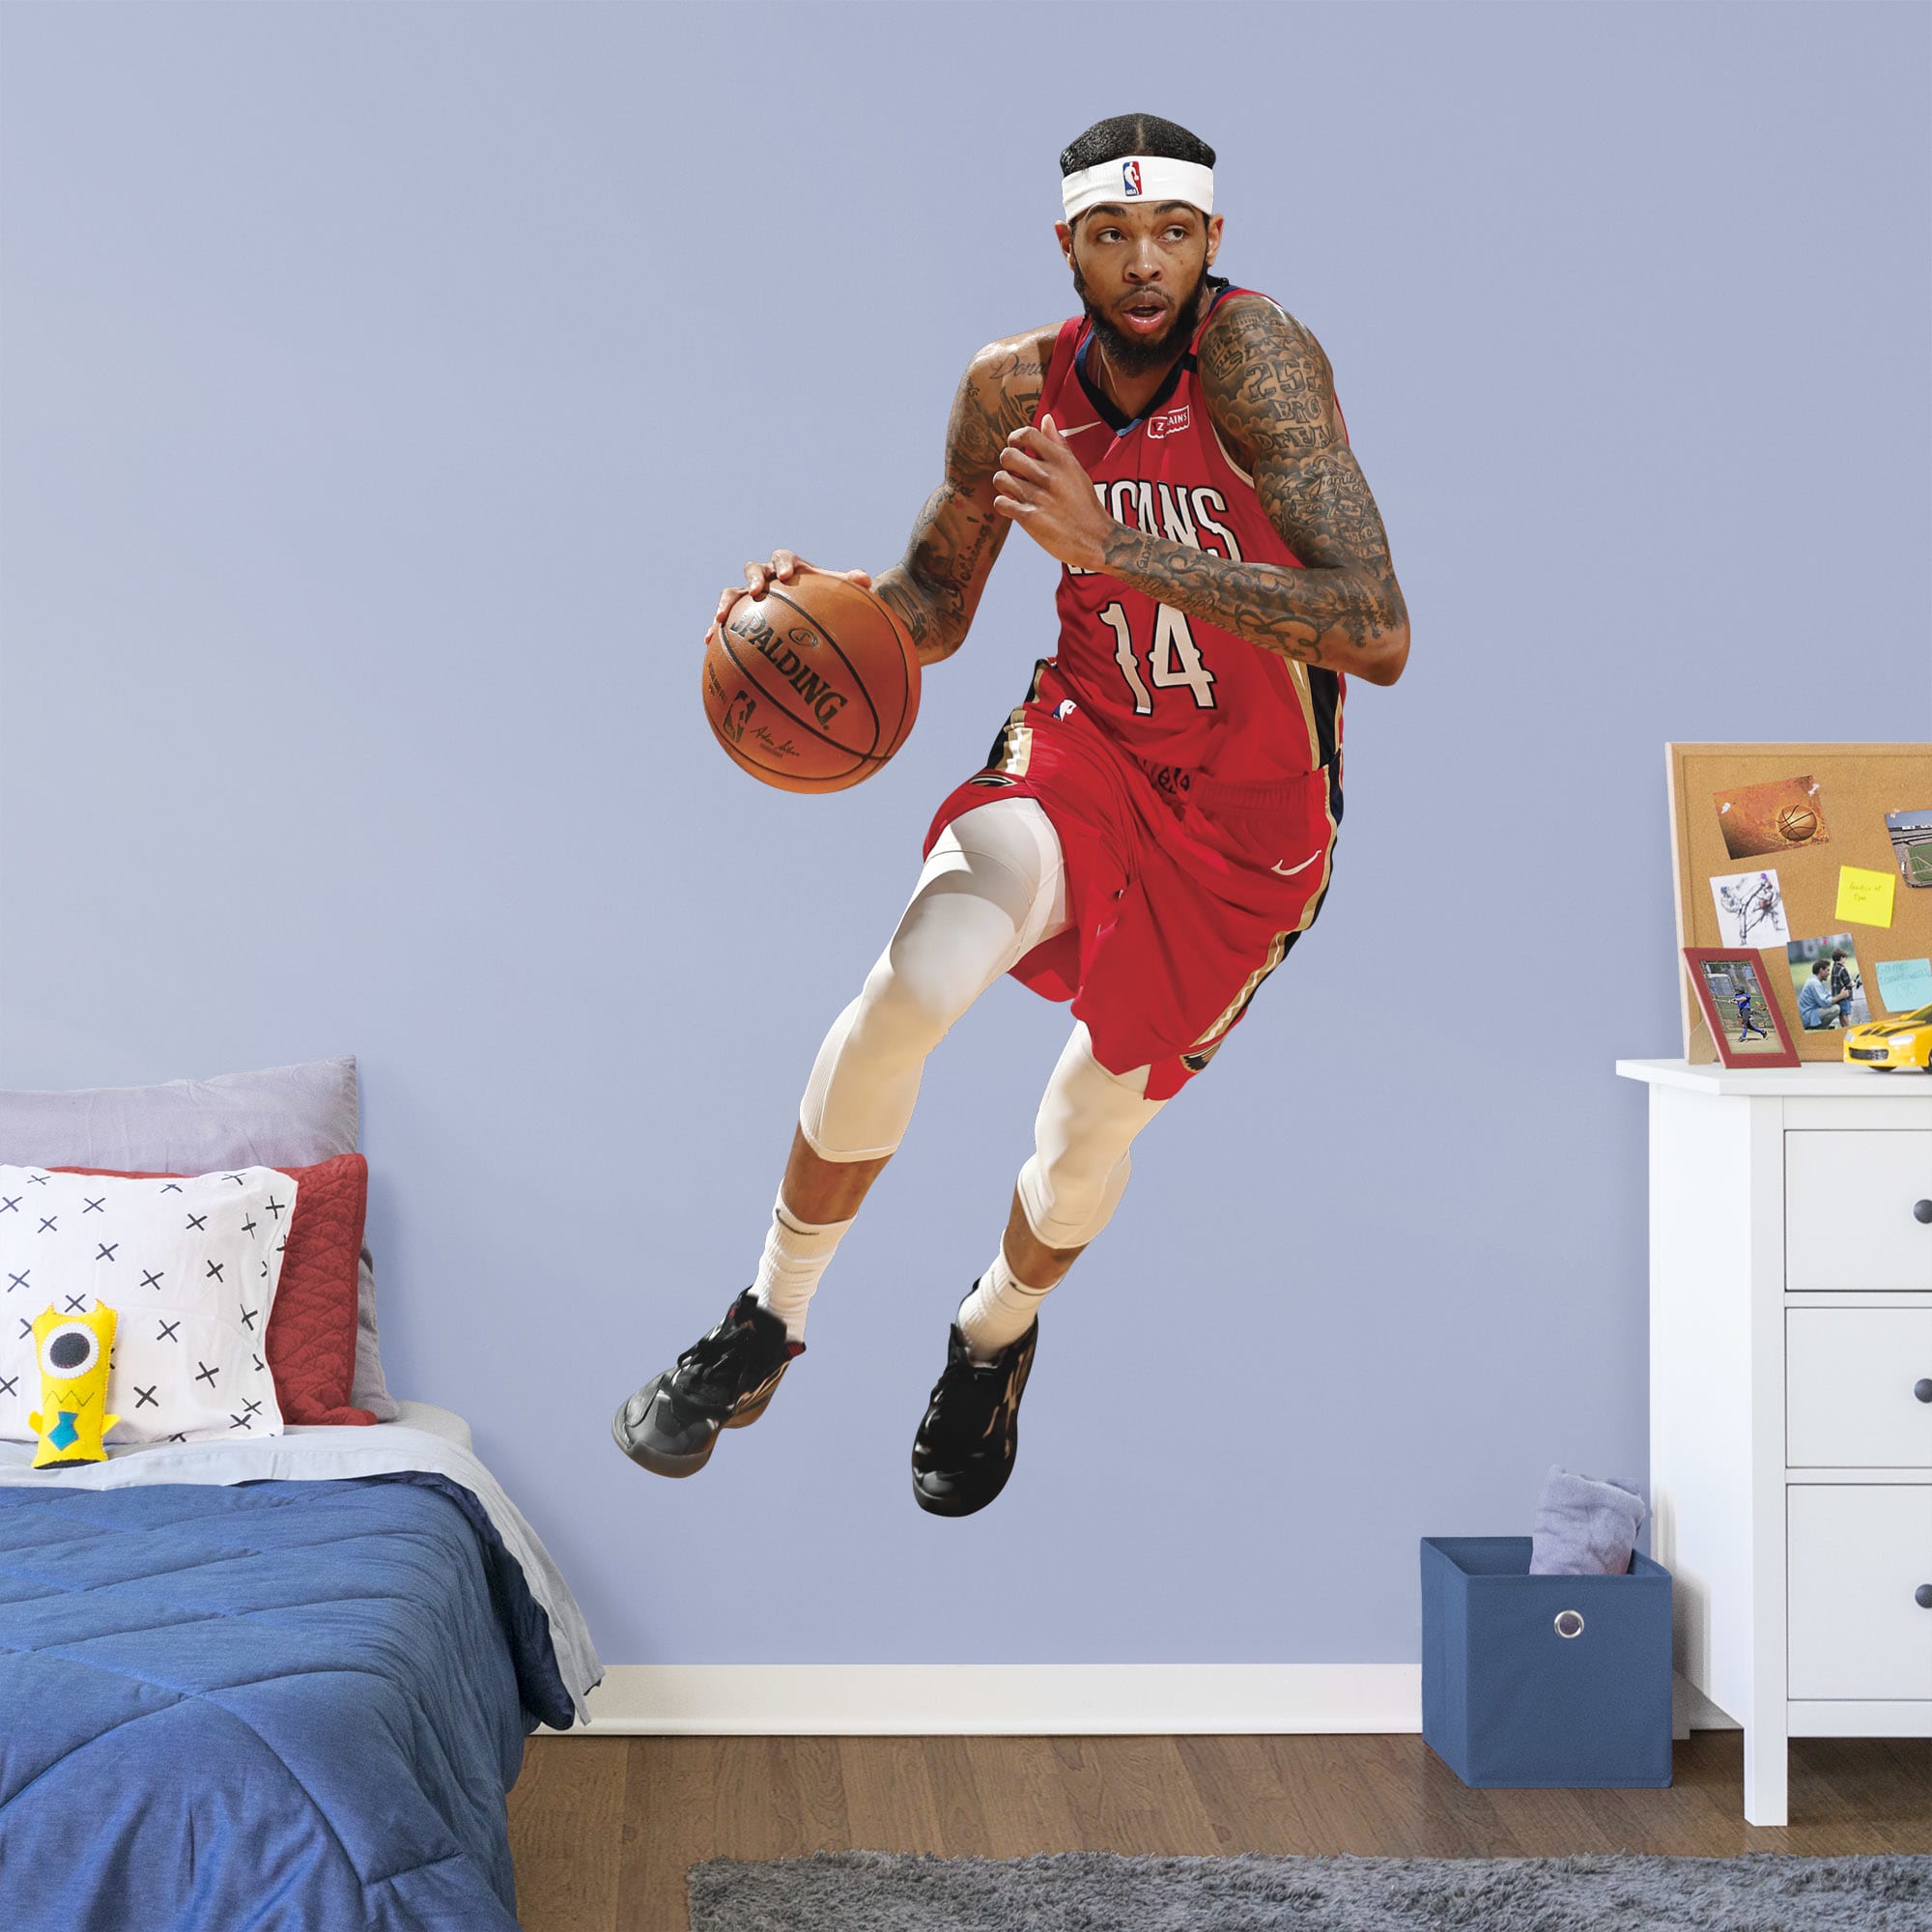 Brandon Ingram for New Orleans Pelicans - Officially Licensed NBA Removable Wall Decal Life-Size Athlete + 2 Decals (44"W x 78"H